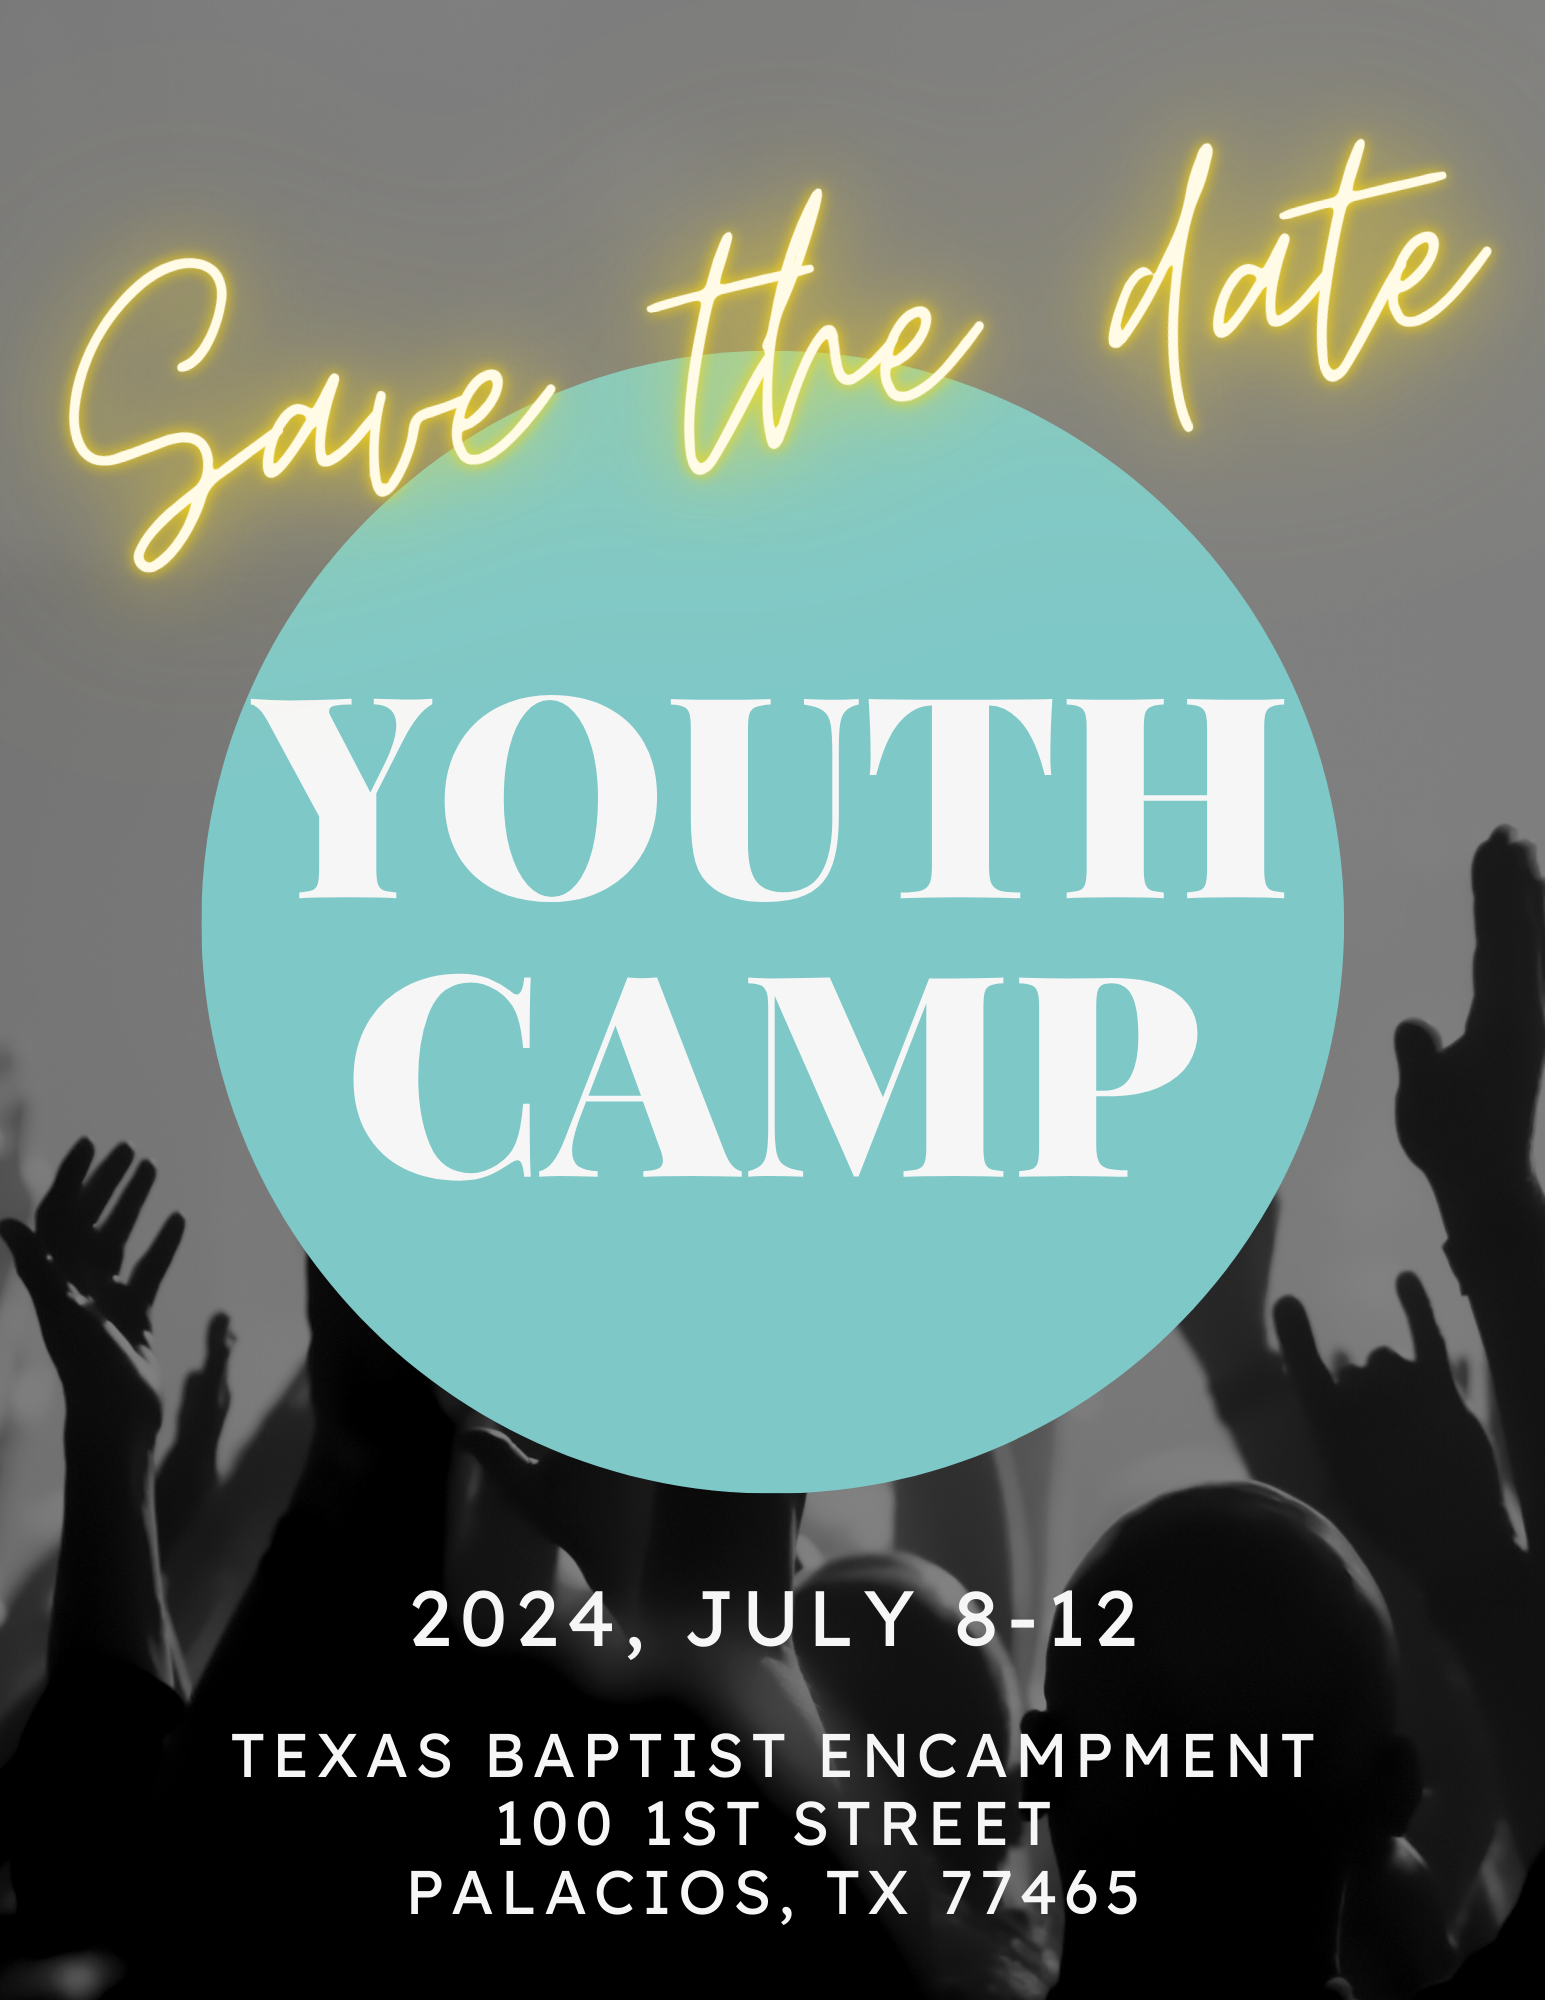 YOUTH CAMP (1)